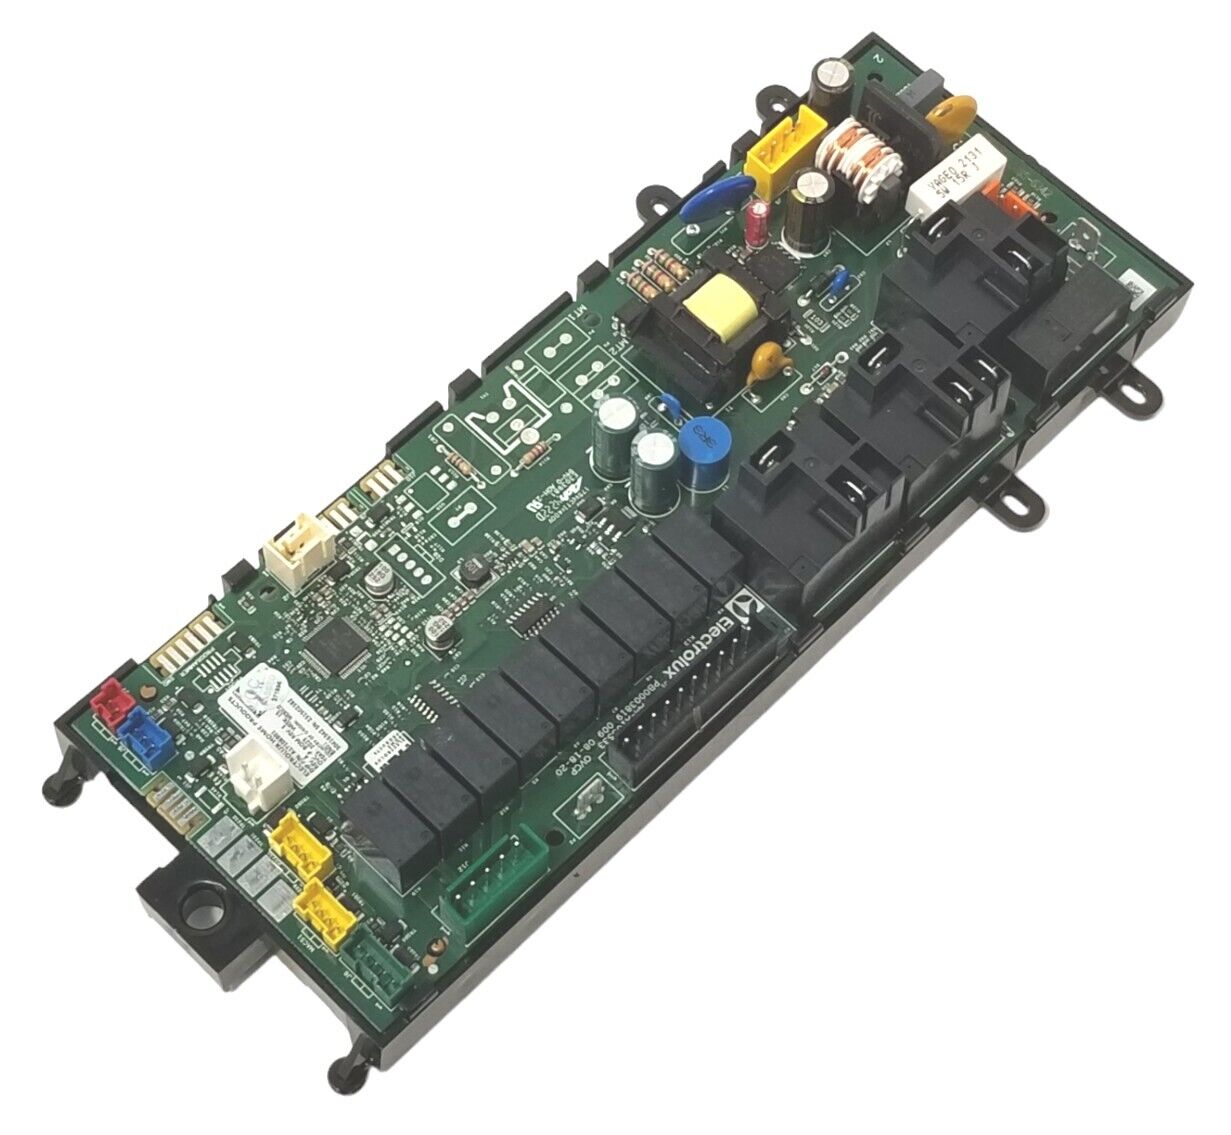 New Genuine OEM Replacement for Frigidaire Range Control Board 5304534719